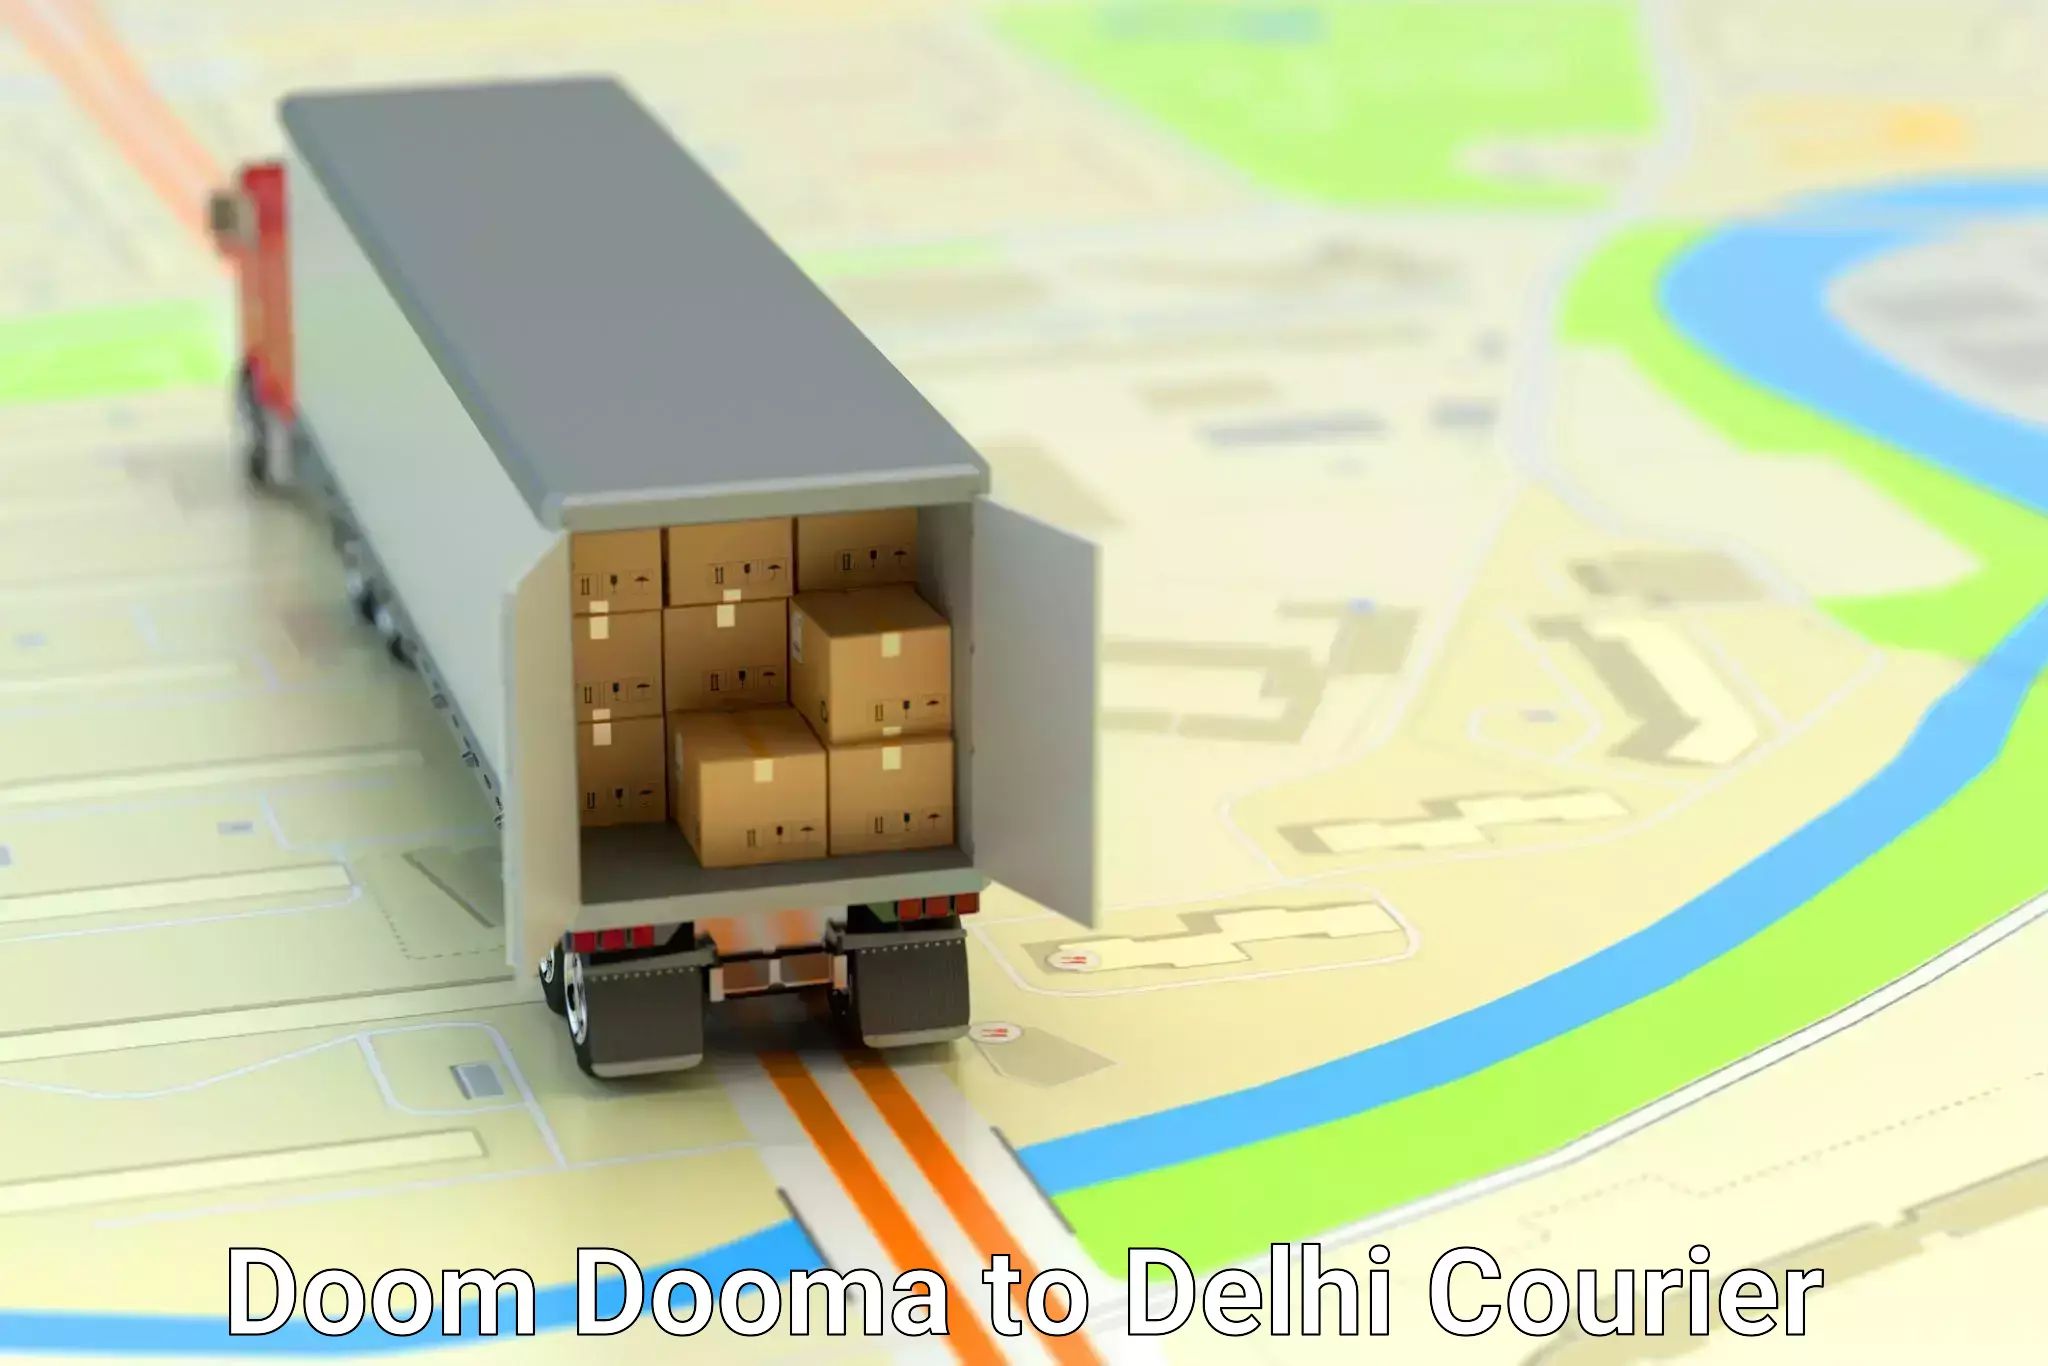 Same-day delivery solutions Doom Dooma to East Delhi